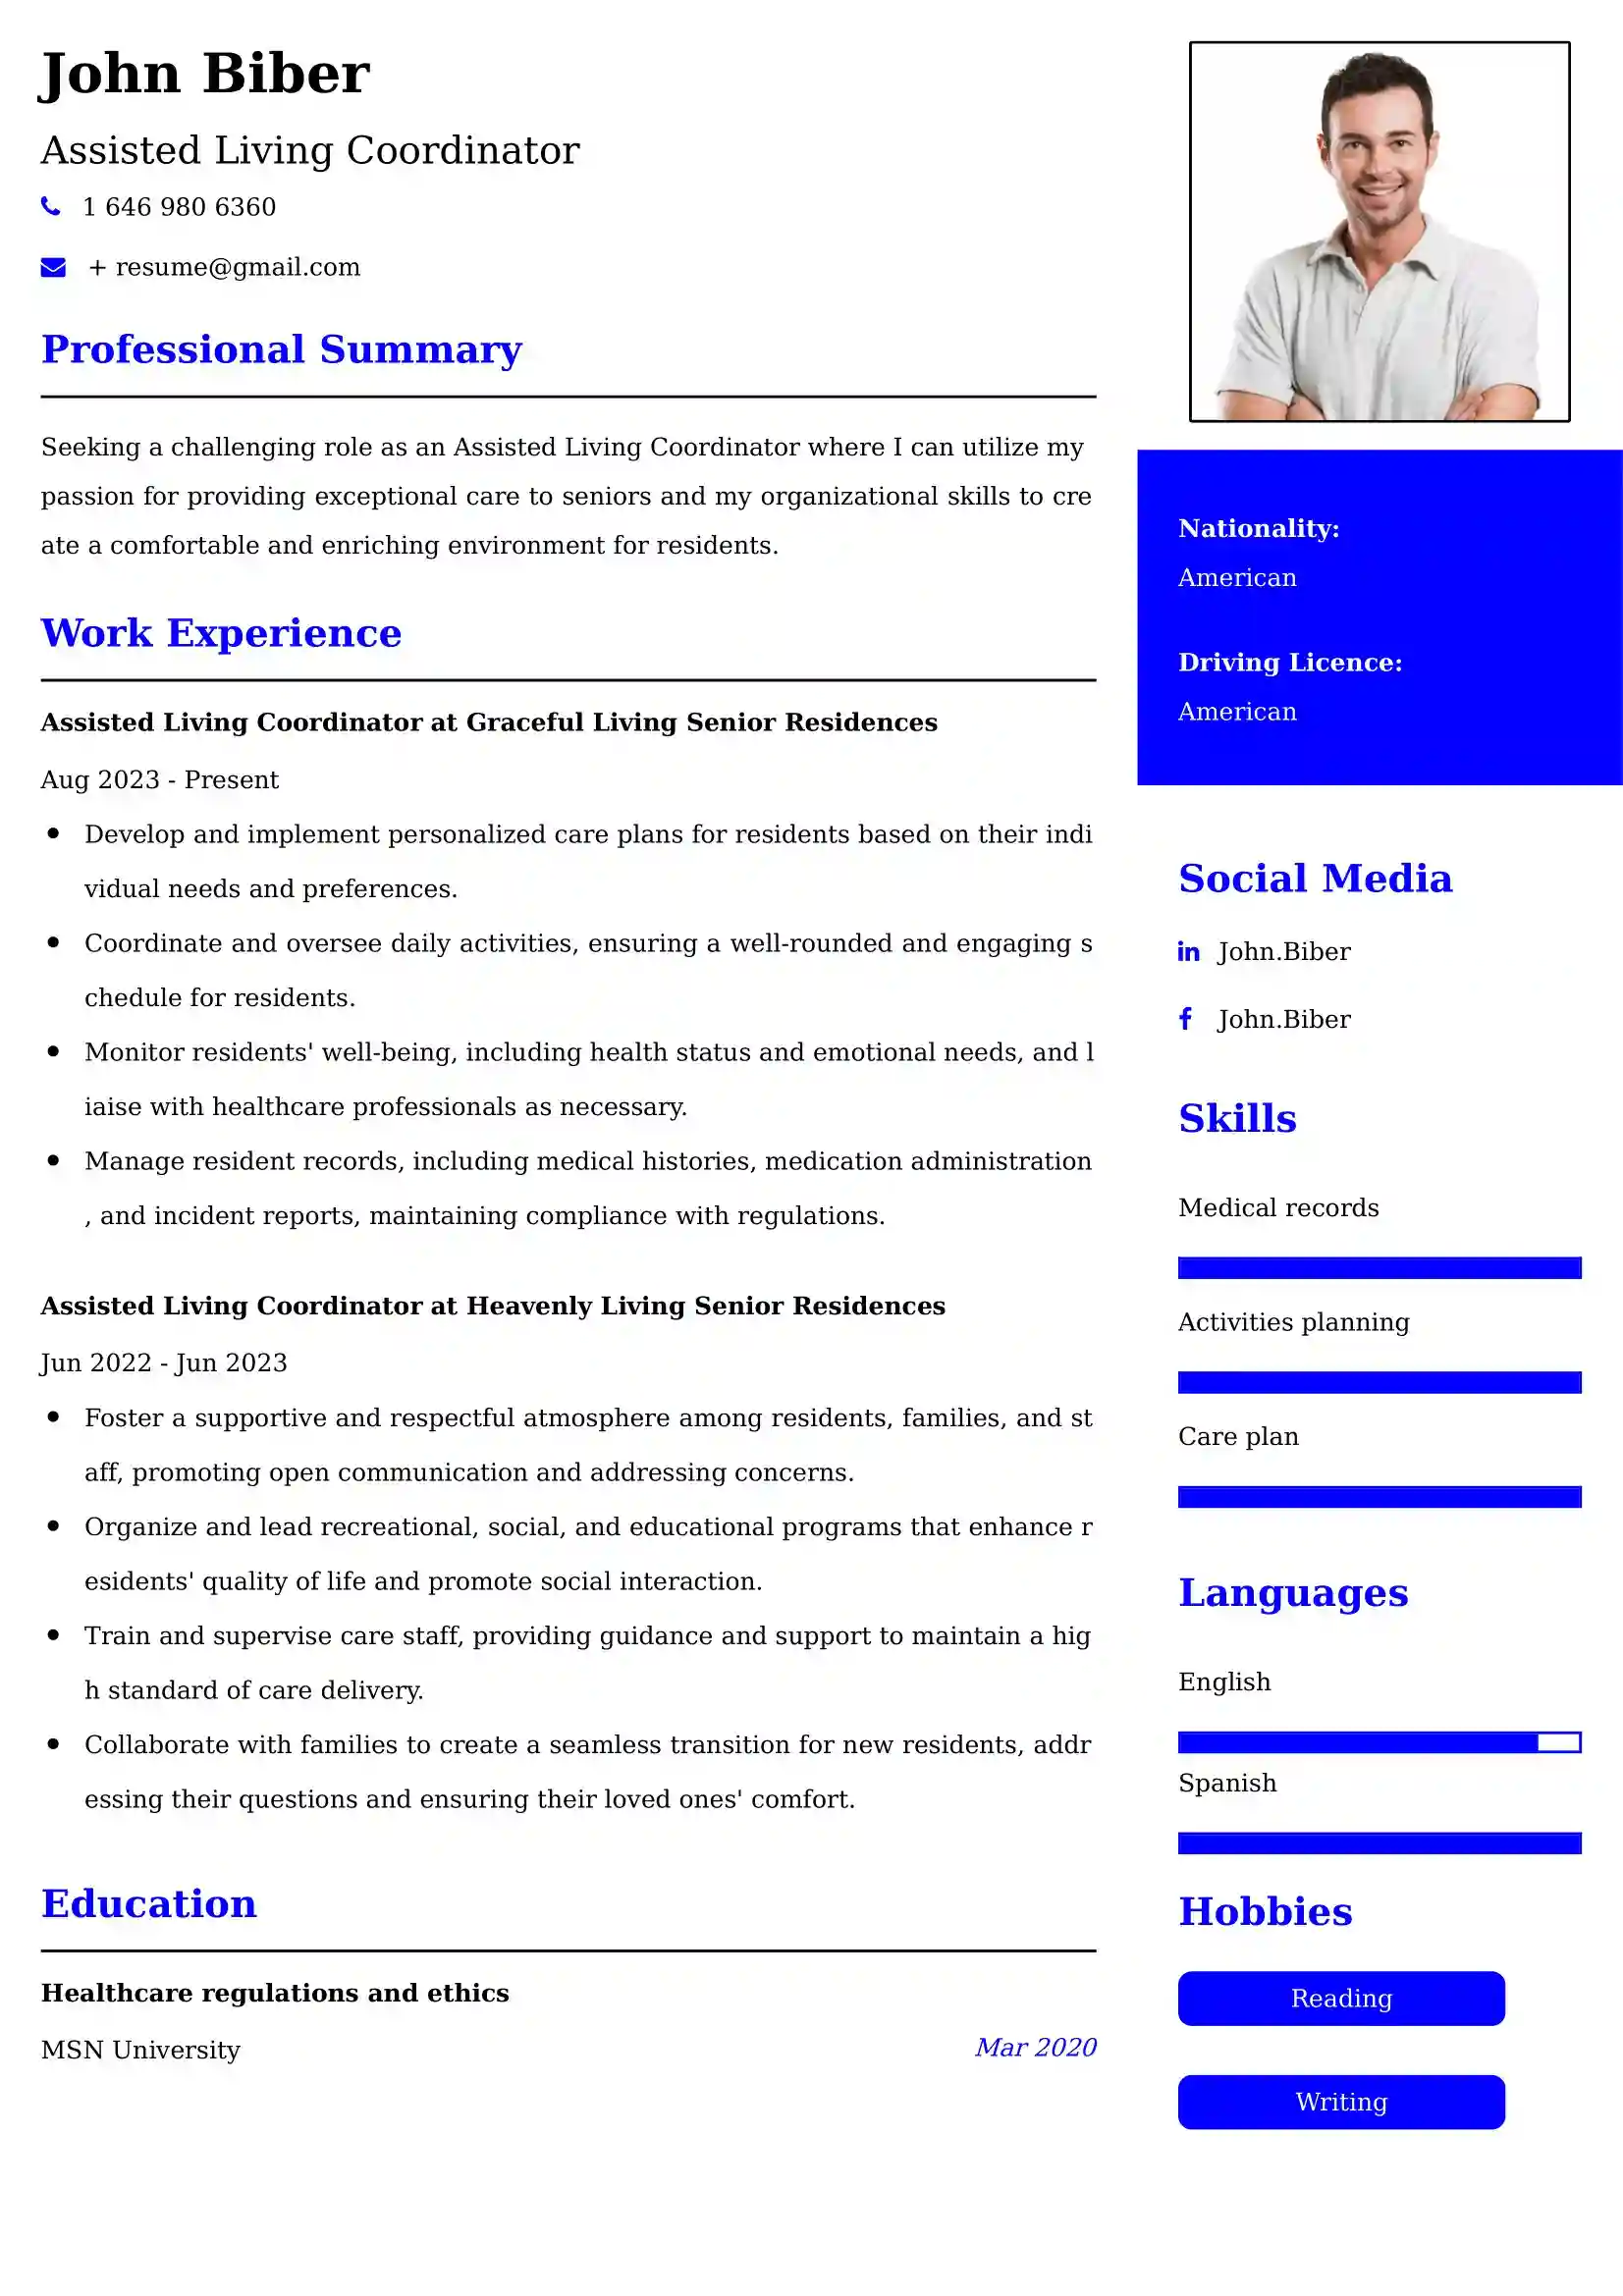 Assisted Living Coordinator Resume Examples - UK Format, Latest Template.